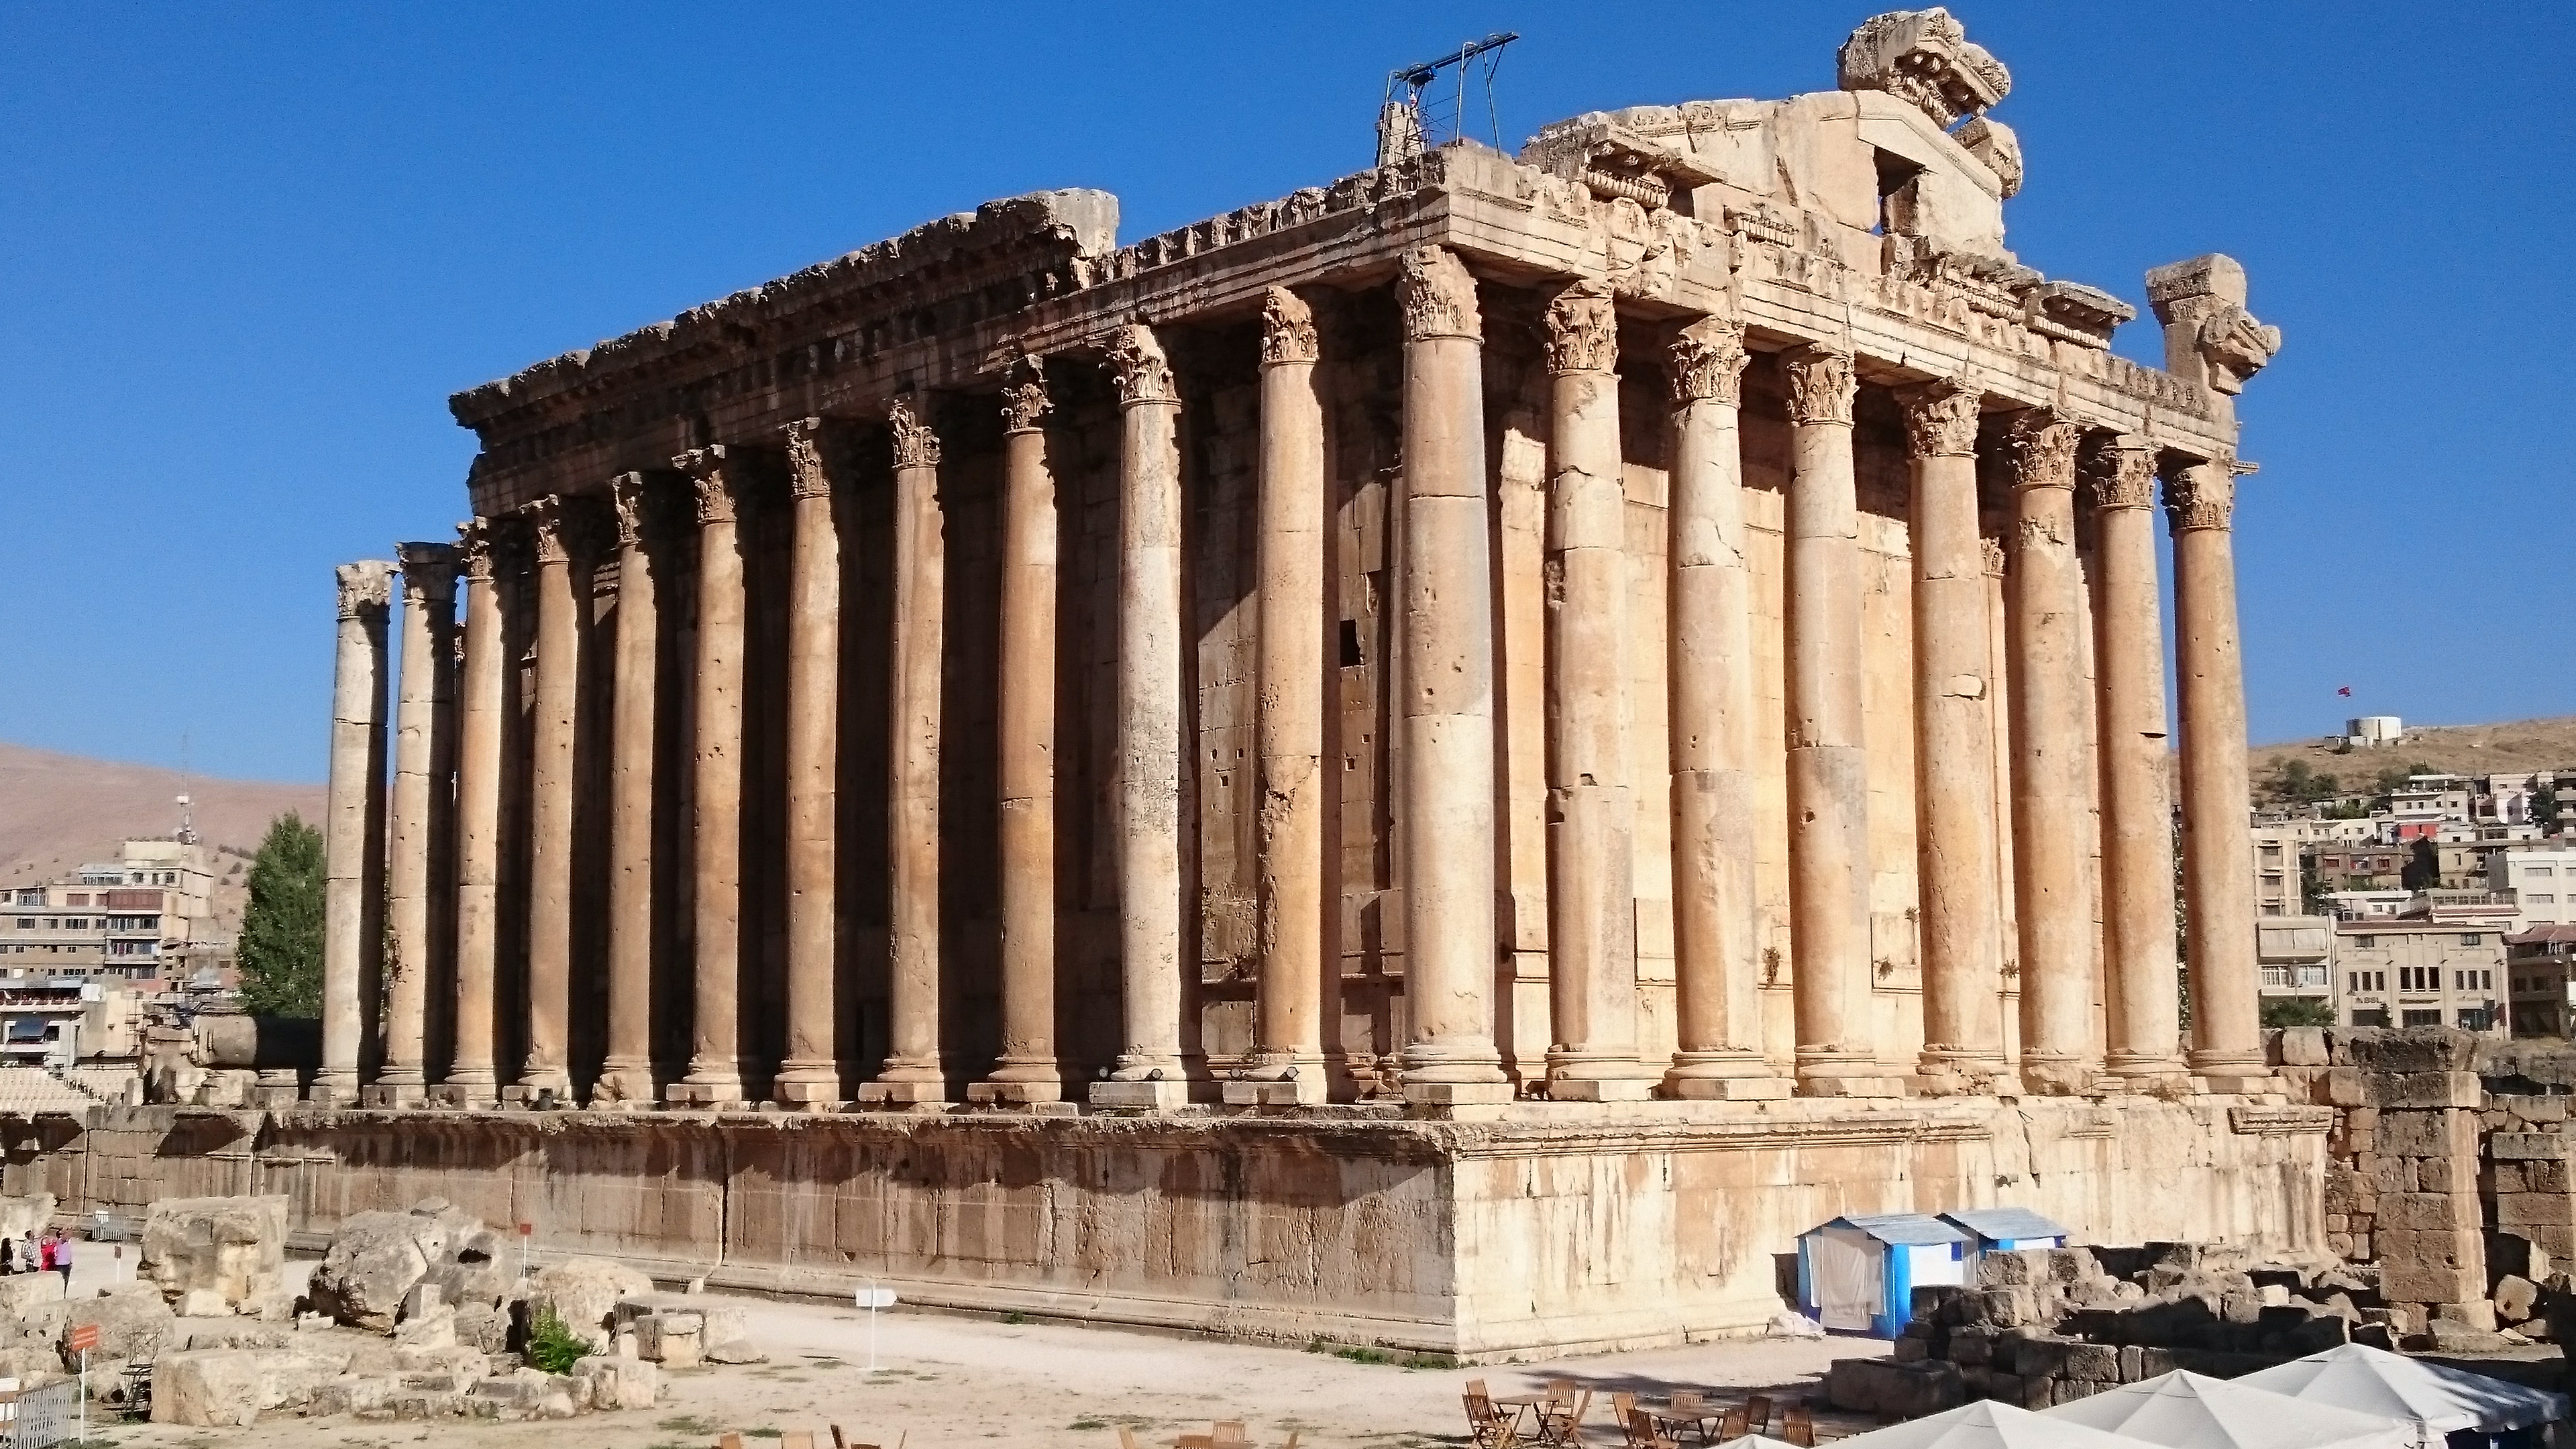 A view of the stunning Ancient Baalbek City